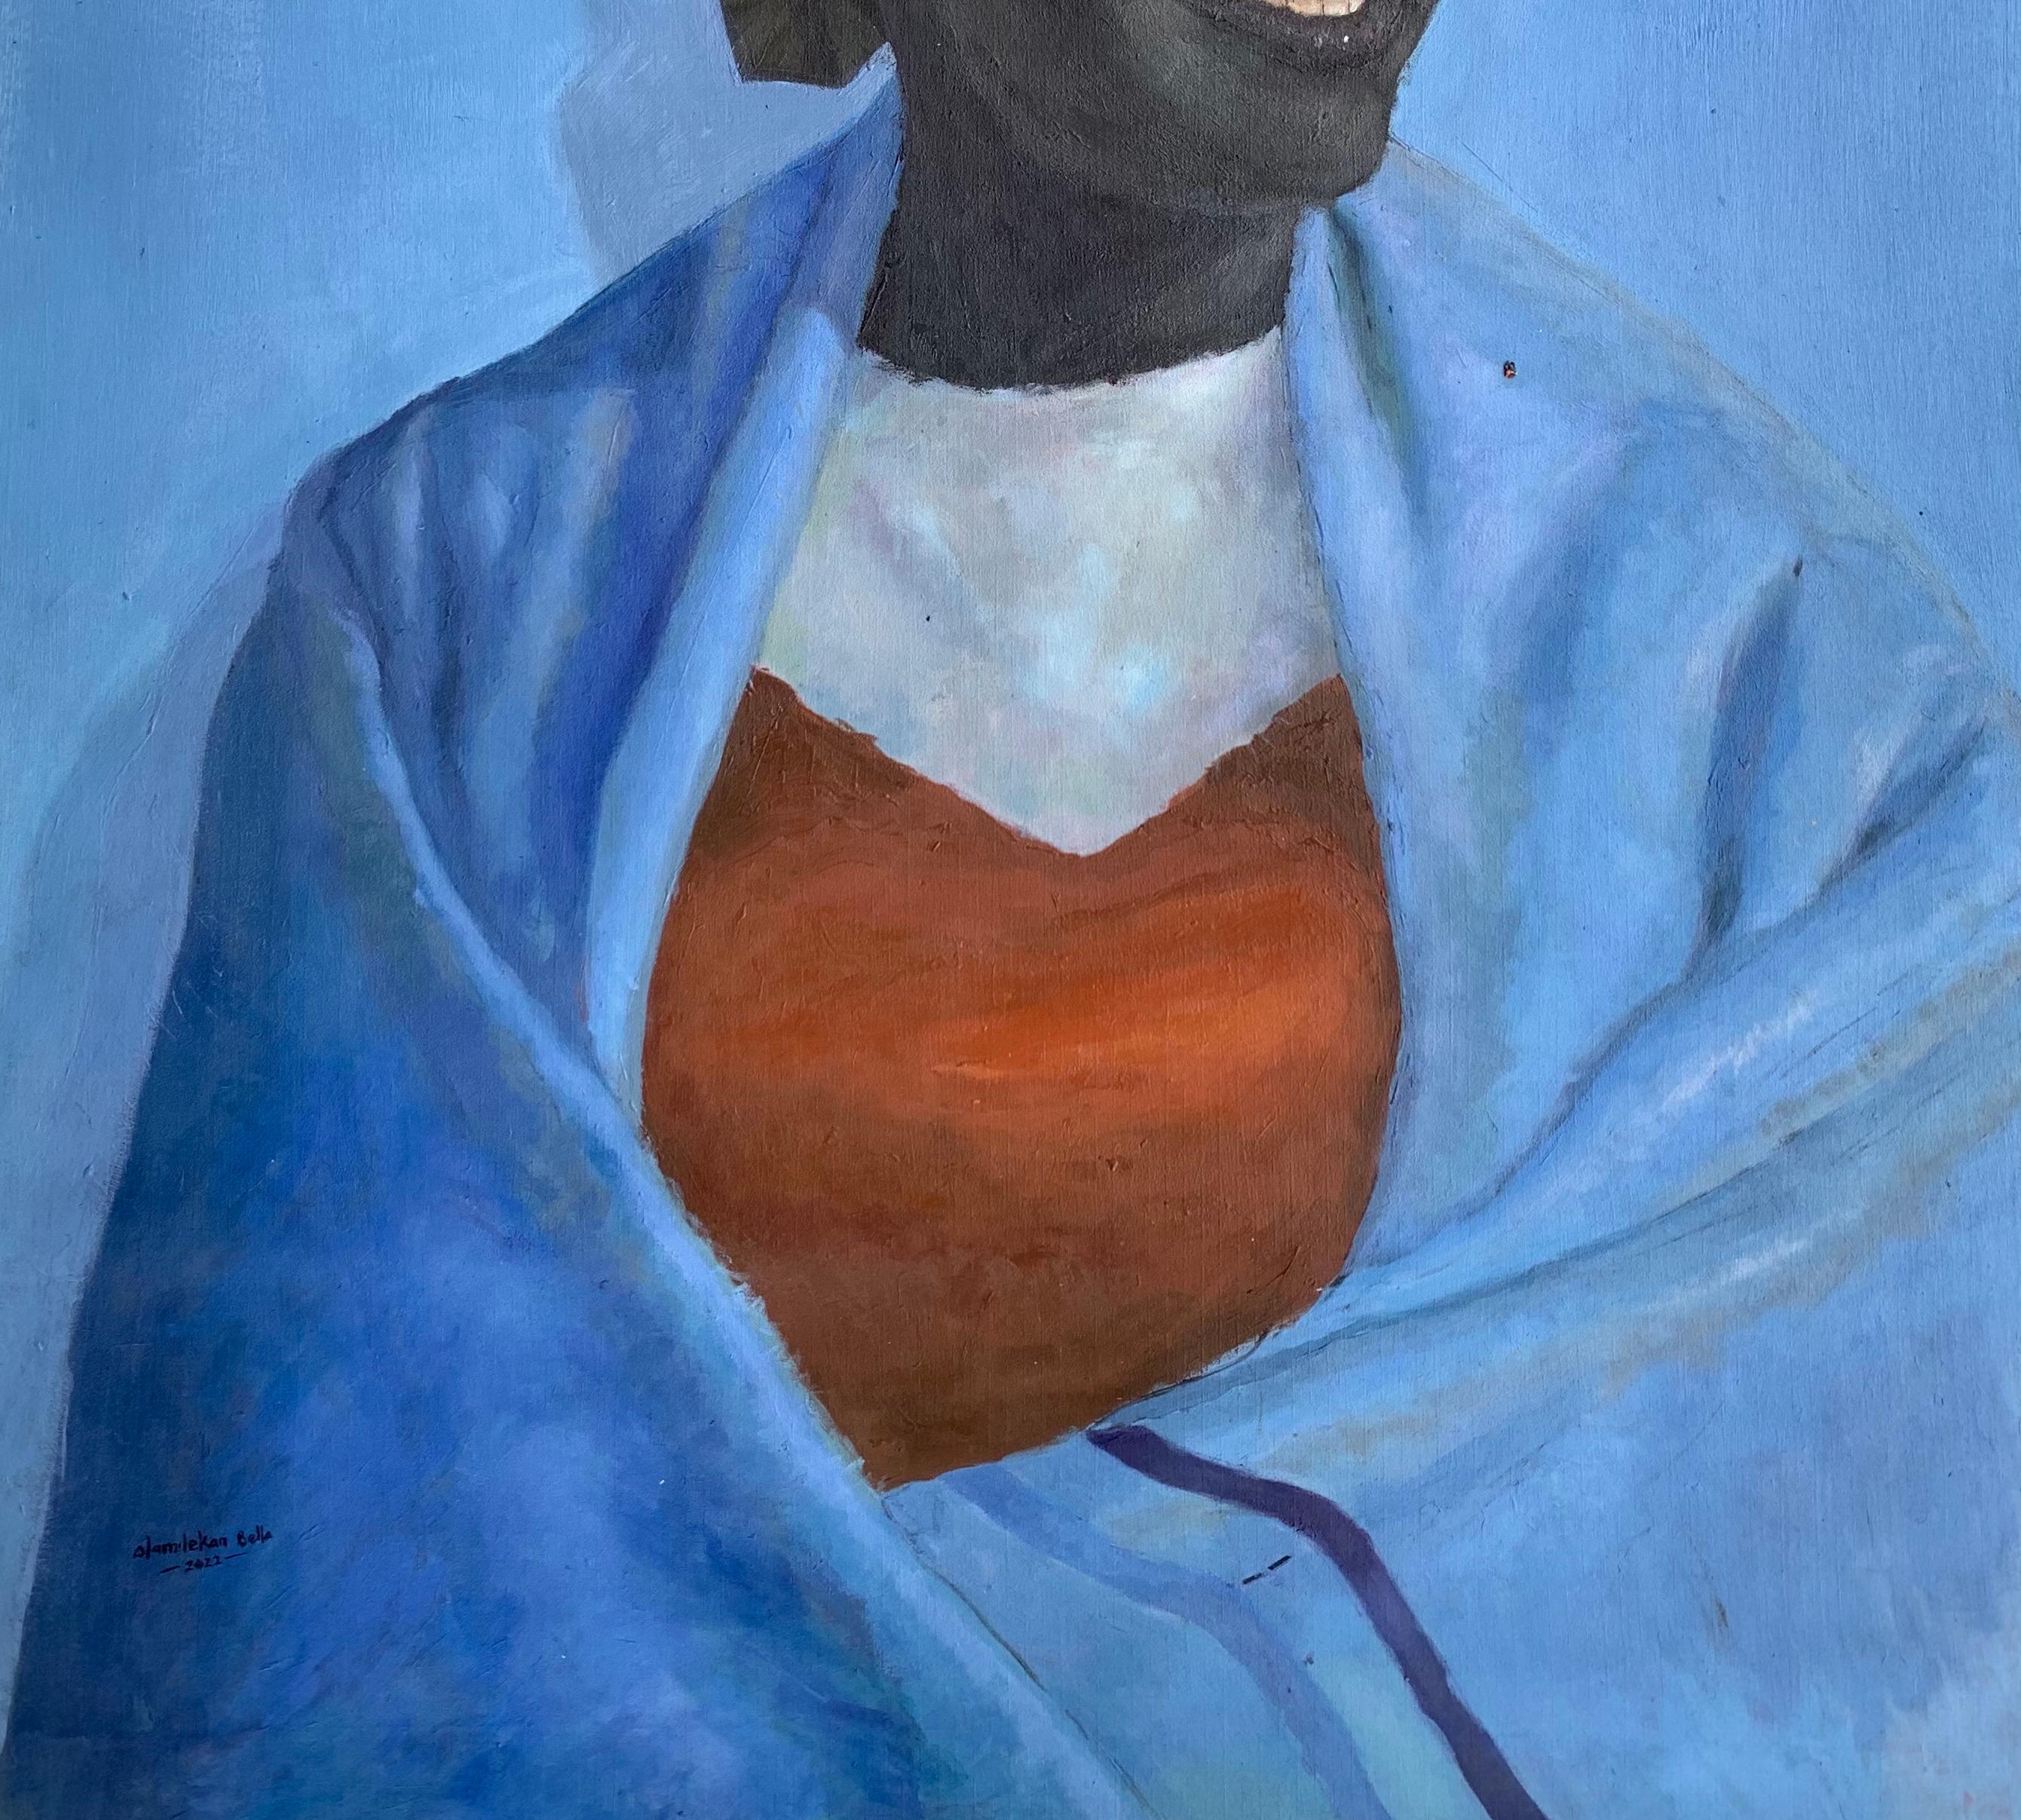 Blue Towel 1 - Expressionist Painting by Olamilekan Bello